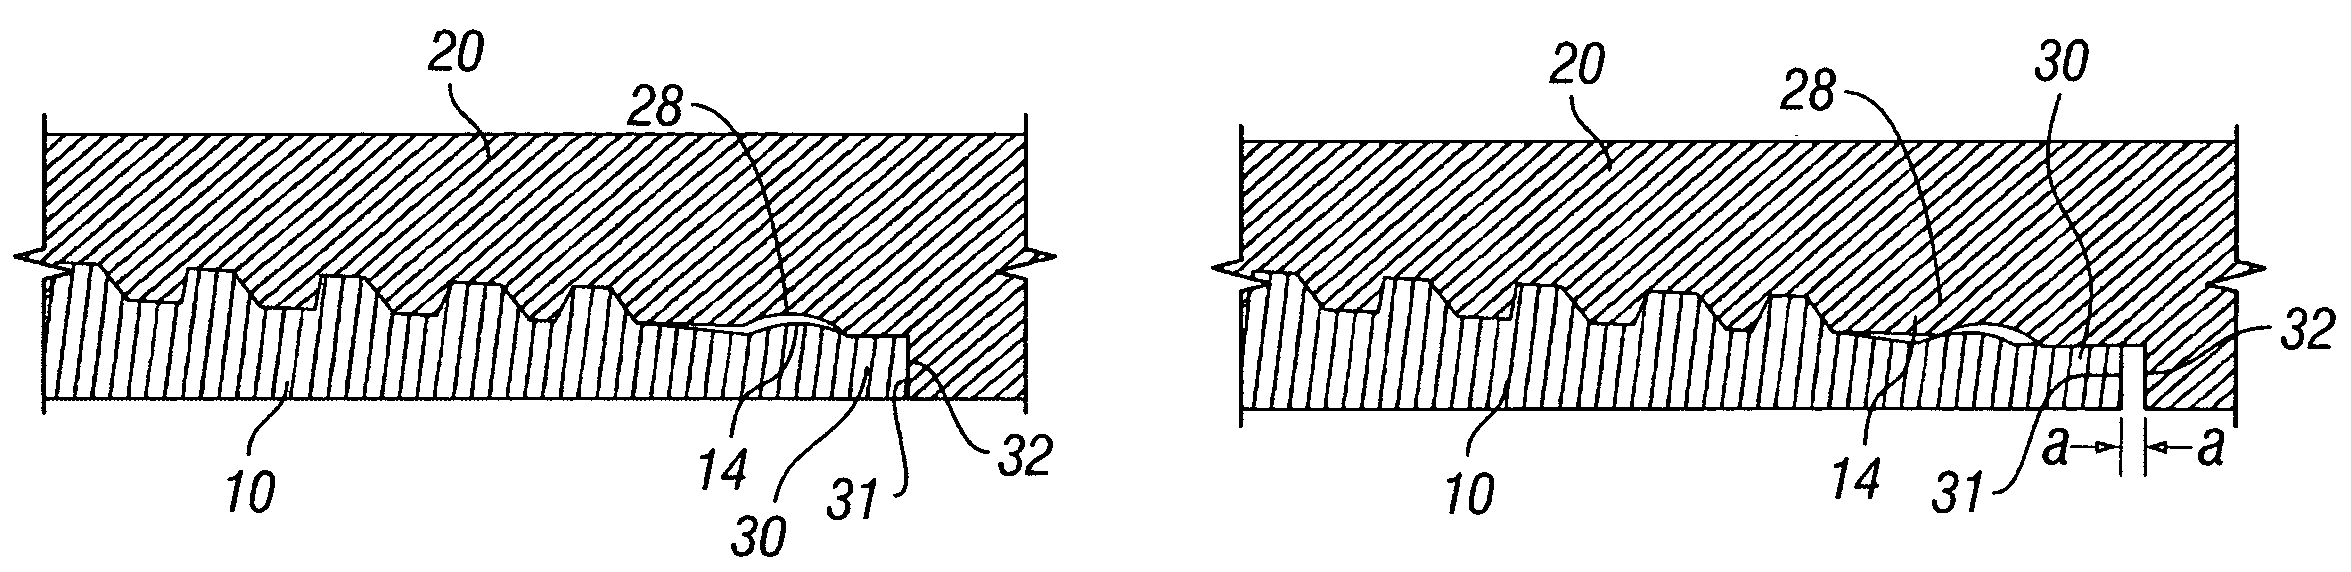 Reverse sliding seal for expandable tubular connections